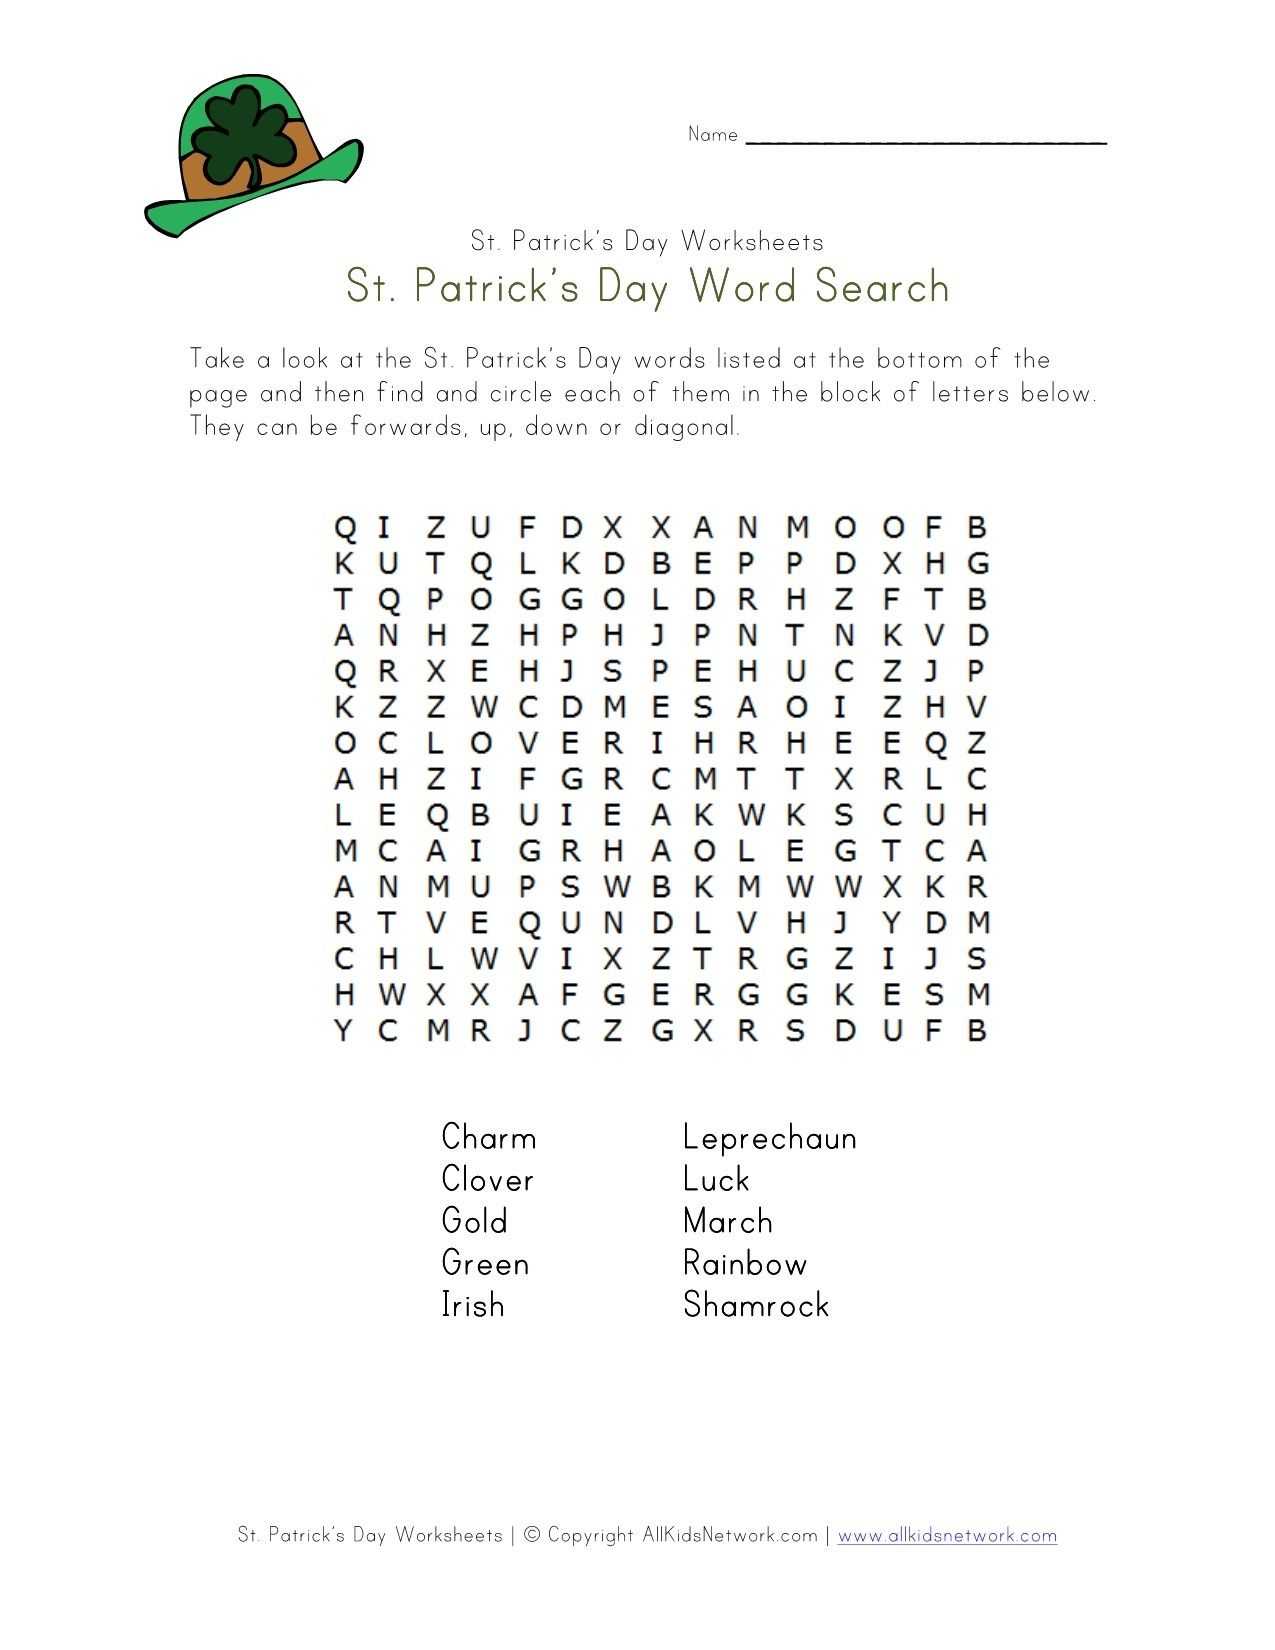 Animal Habitats Worksheets and St Patrick S Day Word Search All Kids Network